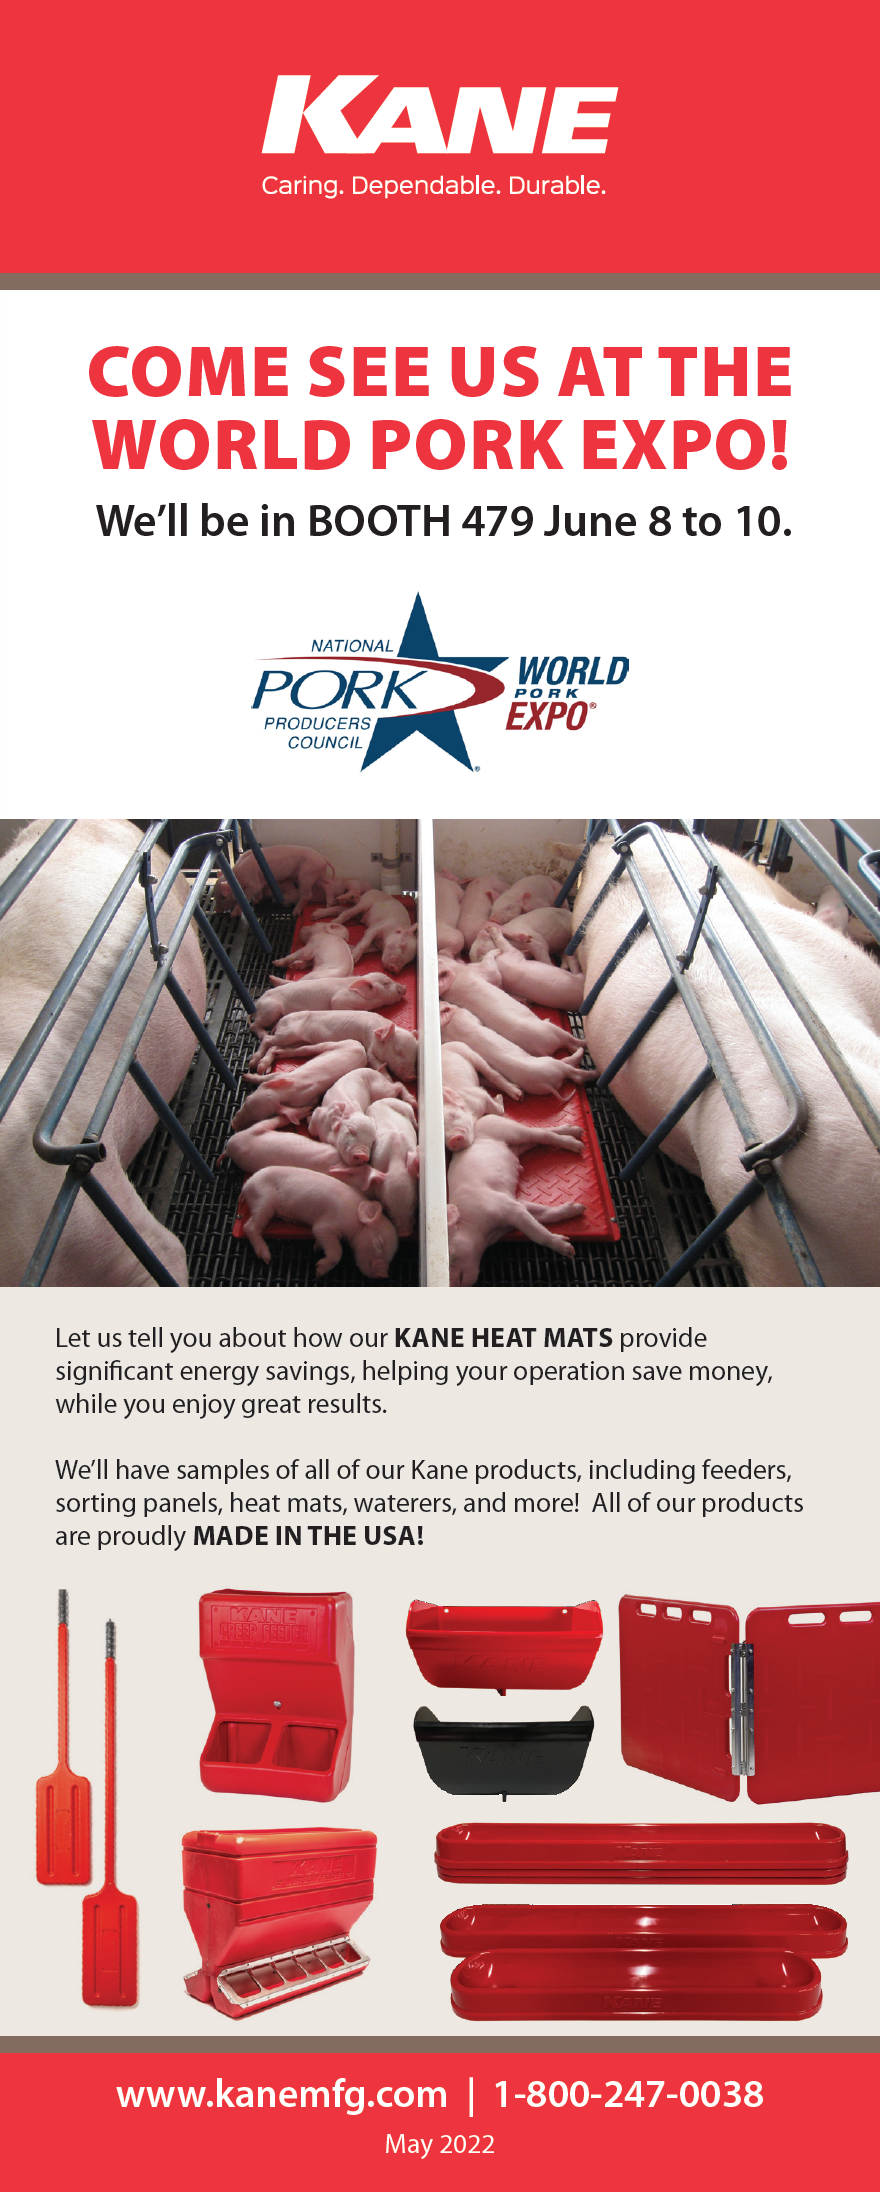 Kane to Present New Products at World Pork Expo June 810 Kane